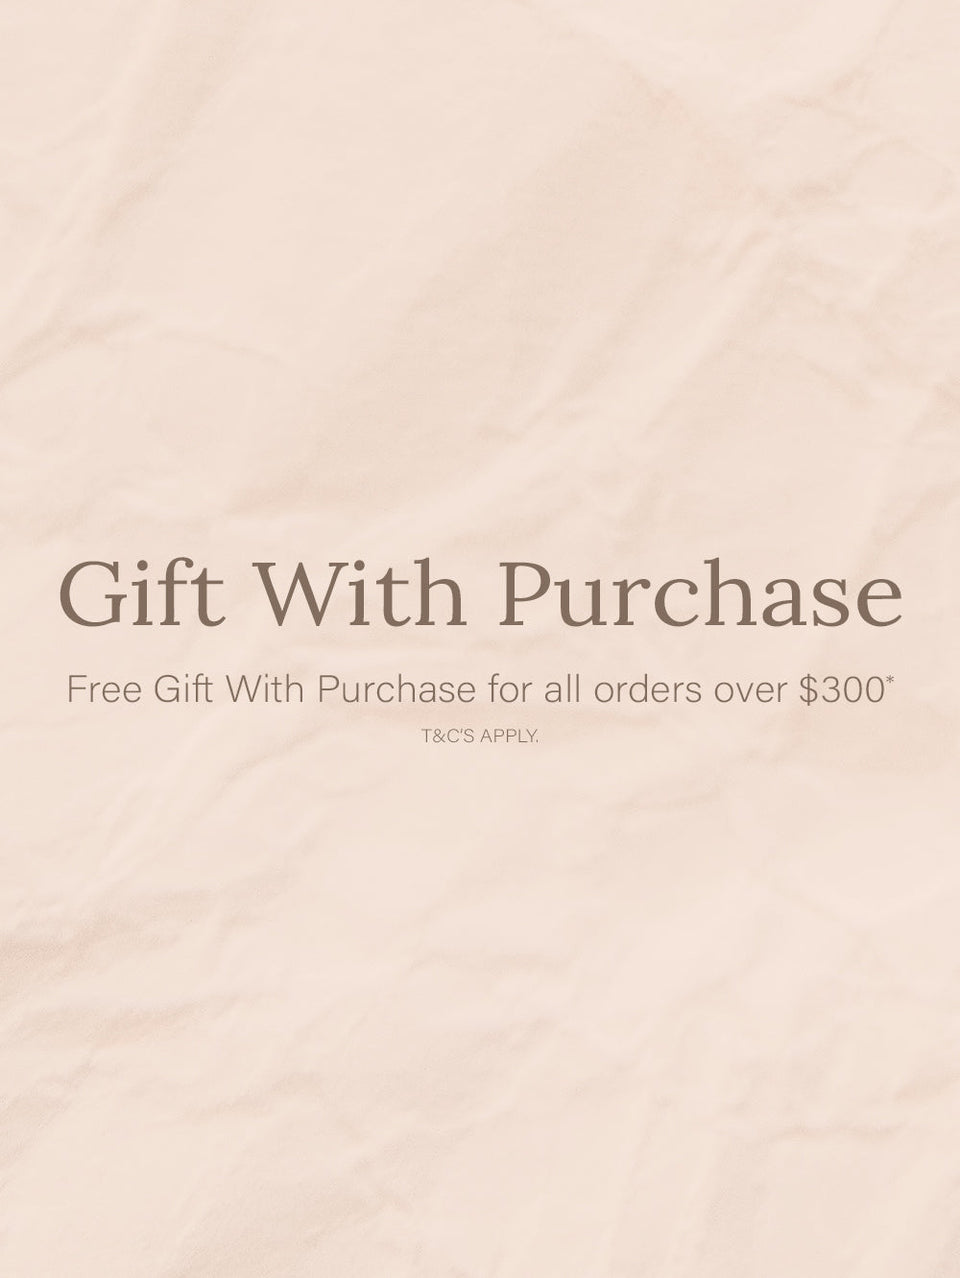 » GIFT WITH PURCHASE (100% off)